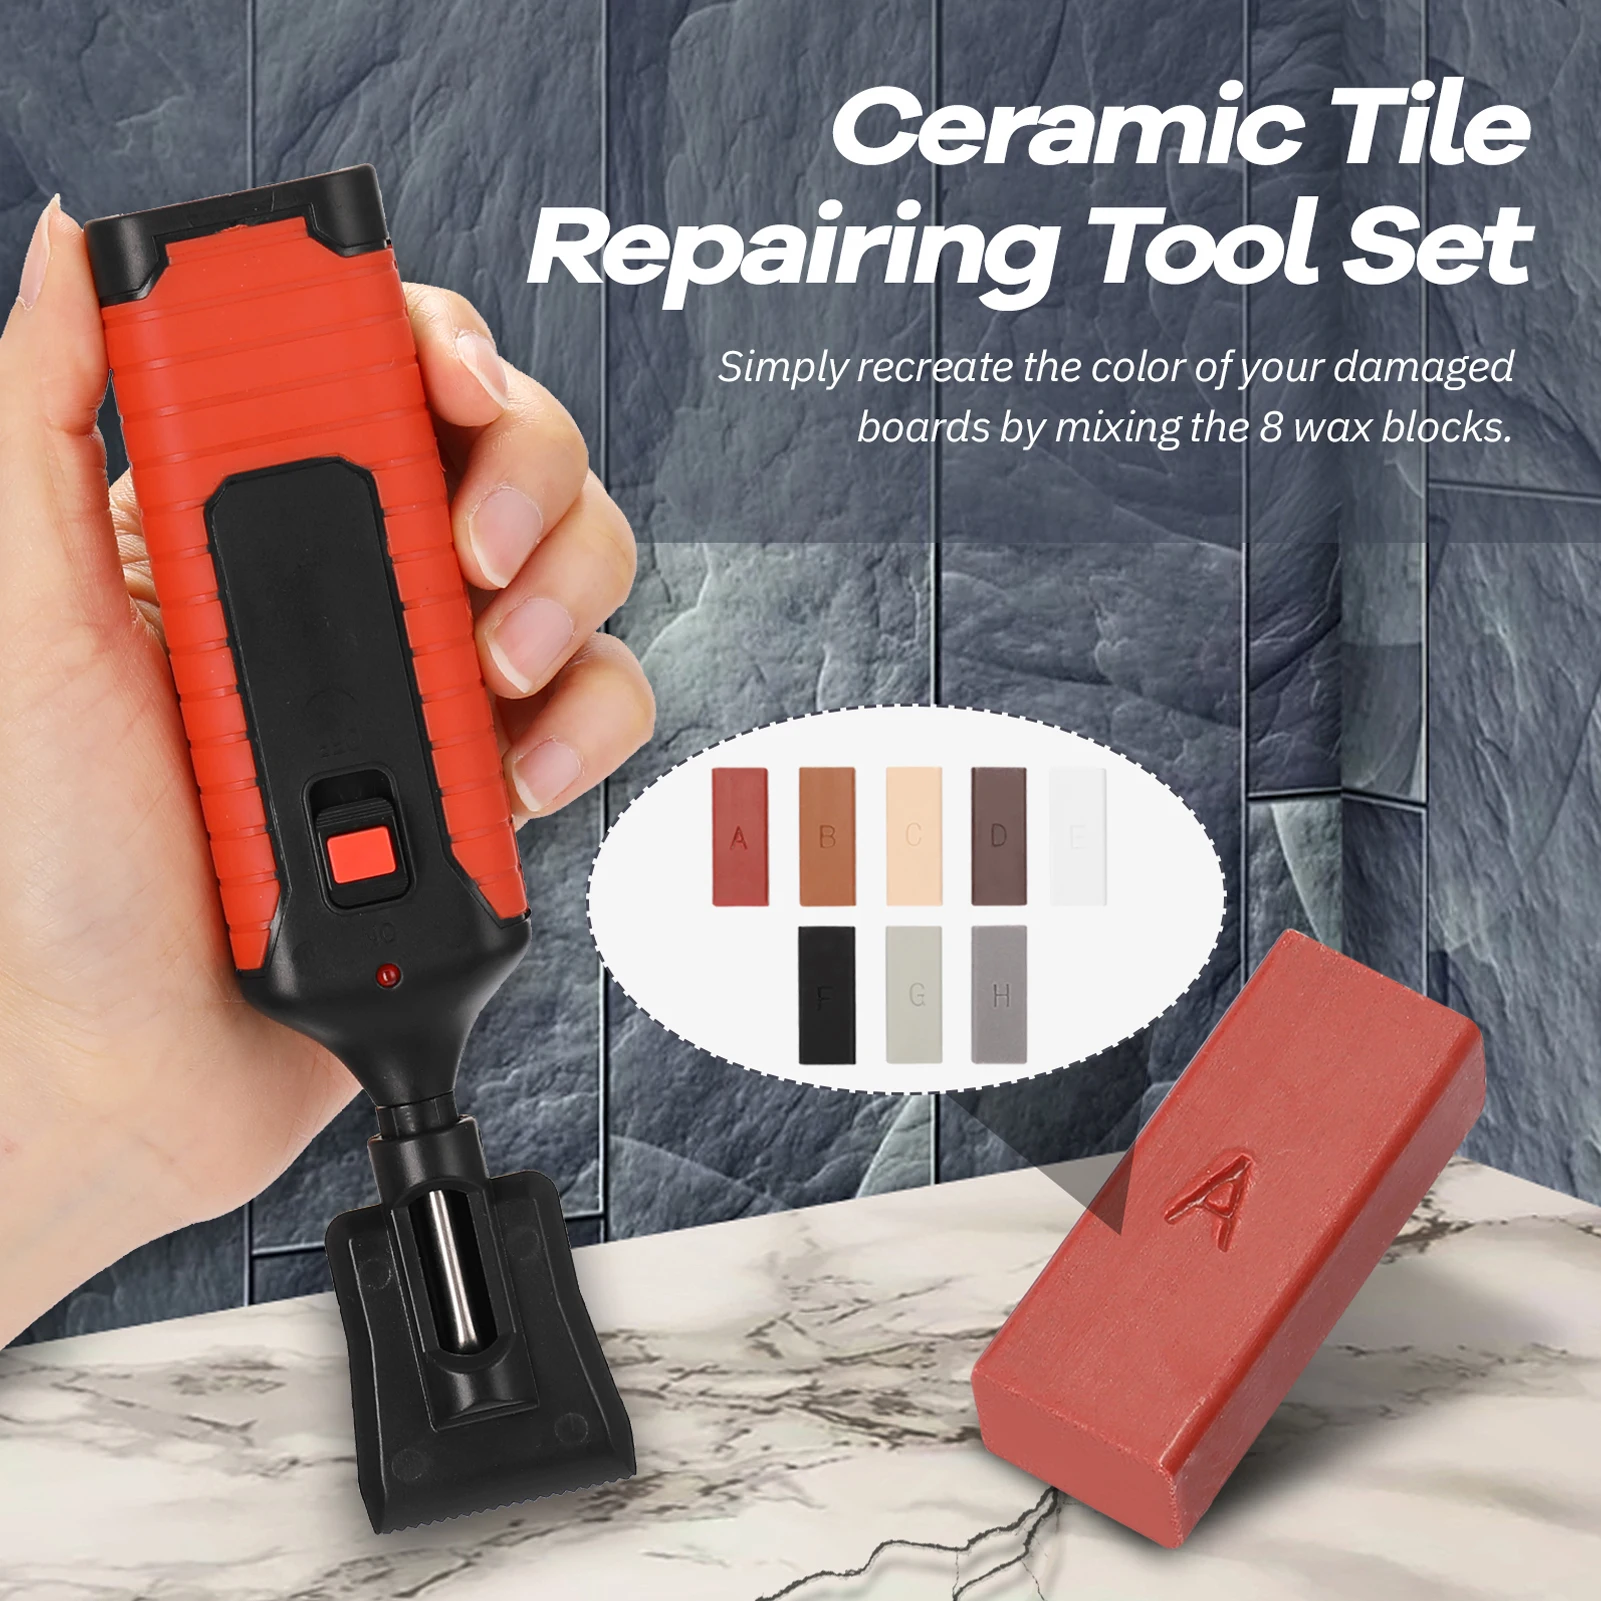 

Ceramic Tile Repairing Tool Set Household Home Floor Tools Convenient Labor Saving Time Saving Scratch Crack Fill Tile Surface